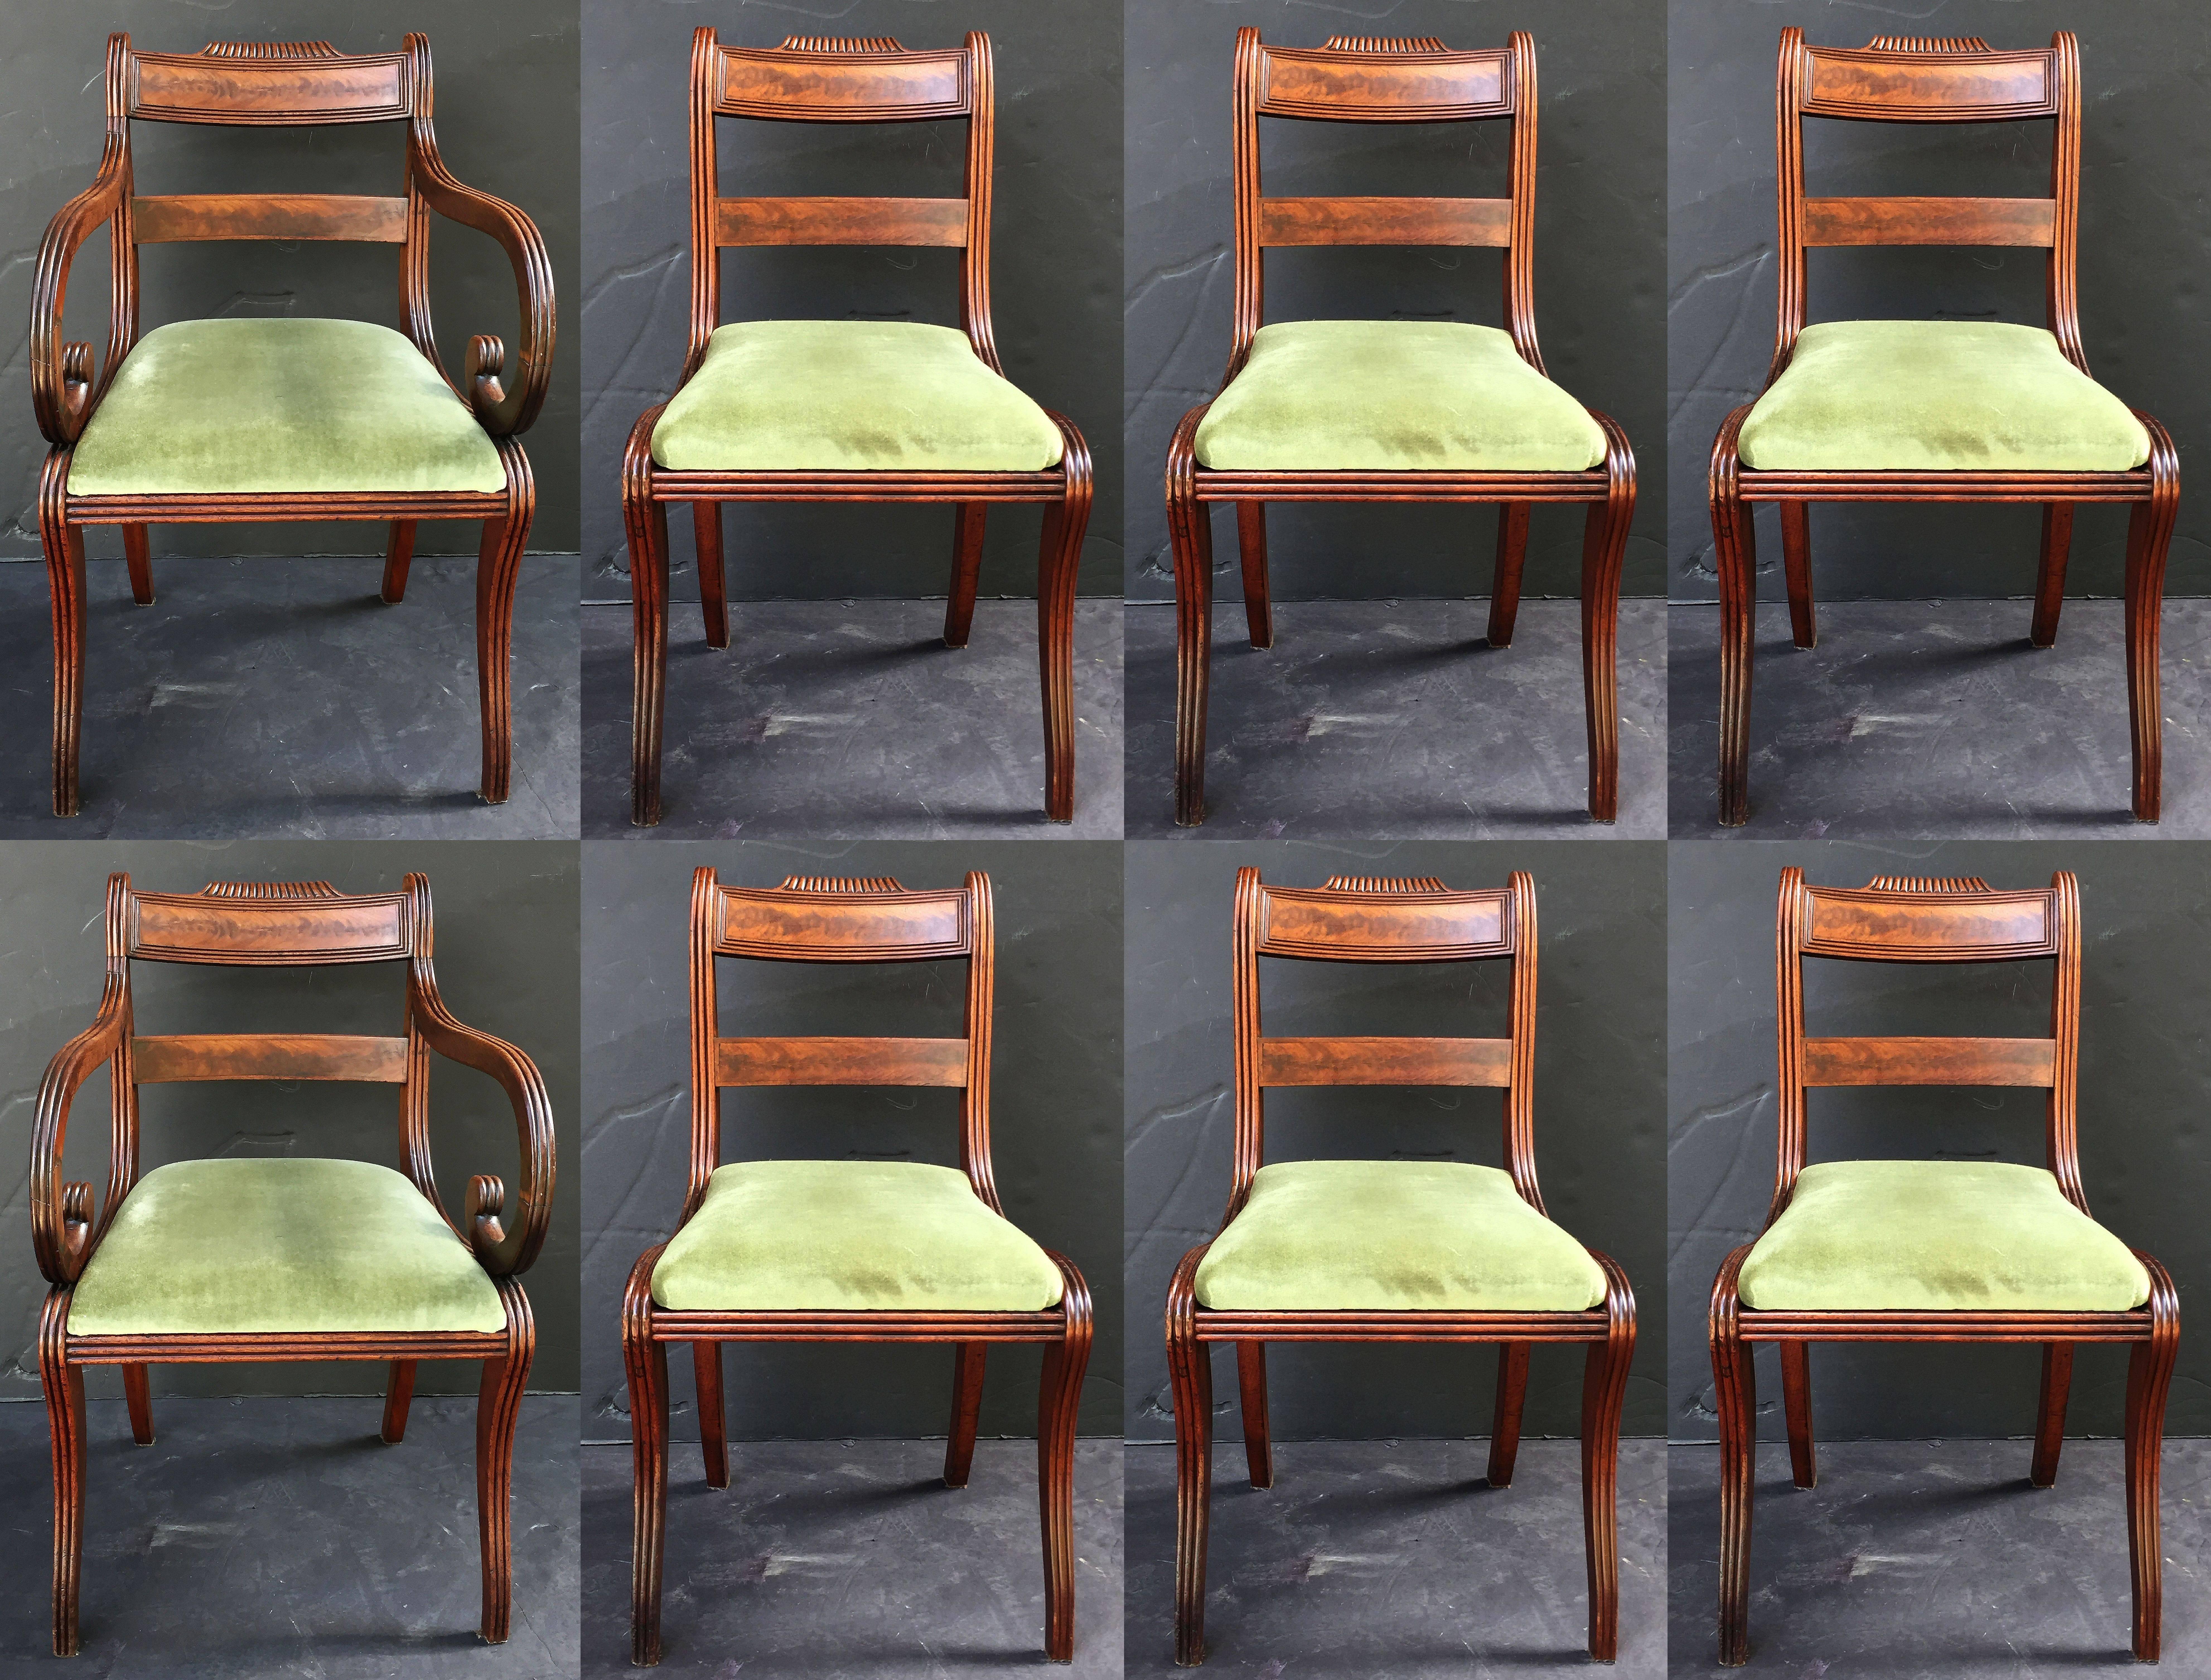 A fine set of eight comfortable dining chairs of mahogany from the Regency era, originally from Scotland.

Each side chair featuring a bowed back of flame mahogany with carved accents, a moulded seat (removable), mounted to four shaped legs.